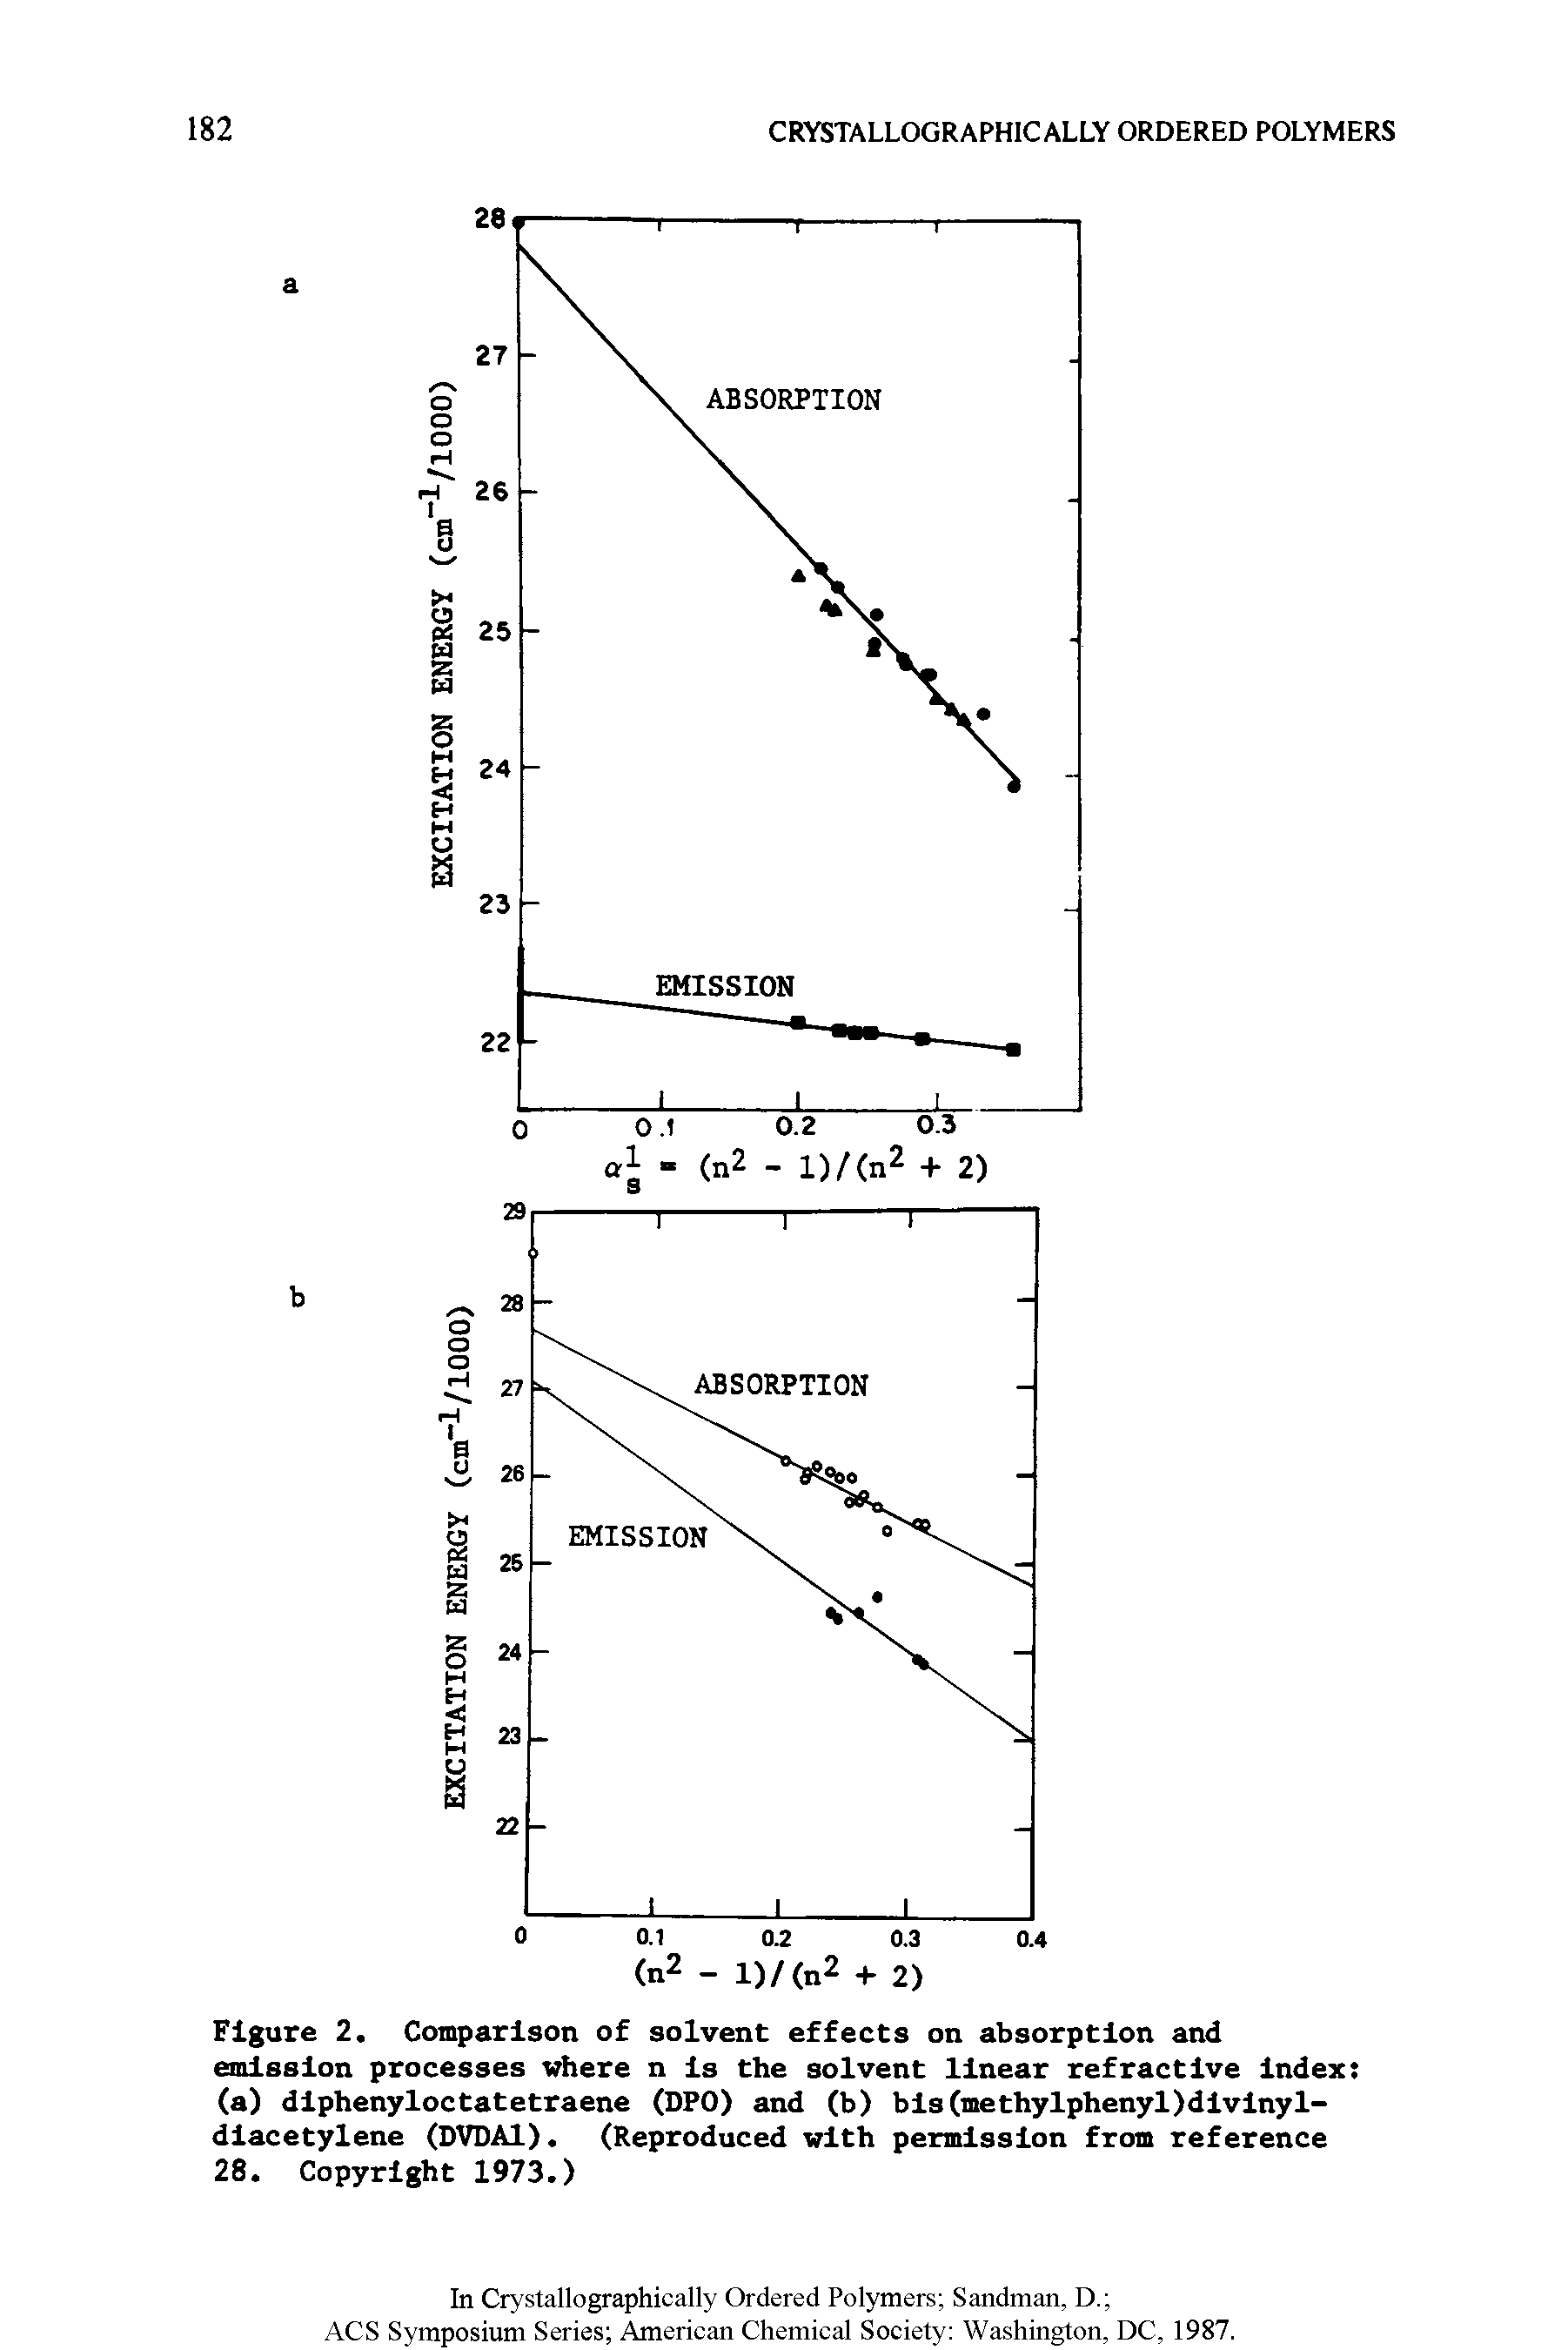 Figure 2. Comparison of solvent effects on absorption and emission processes where n Is the solvent linear refractive Index (a) dlphenyloctatetraene (DPO) and (b) bls(methylphenyl)dlvlnyl-dlacetylene (DVDAl). (Reproduced with permission from reference 28. Copyright 1973.)...